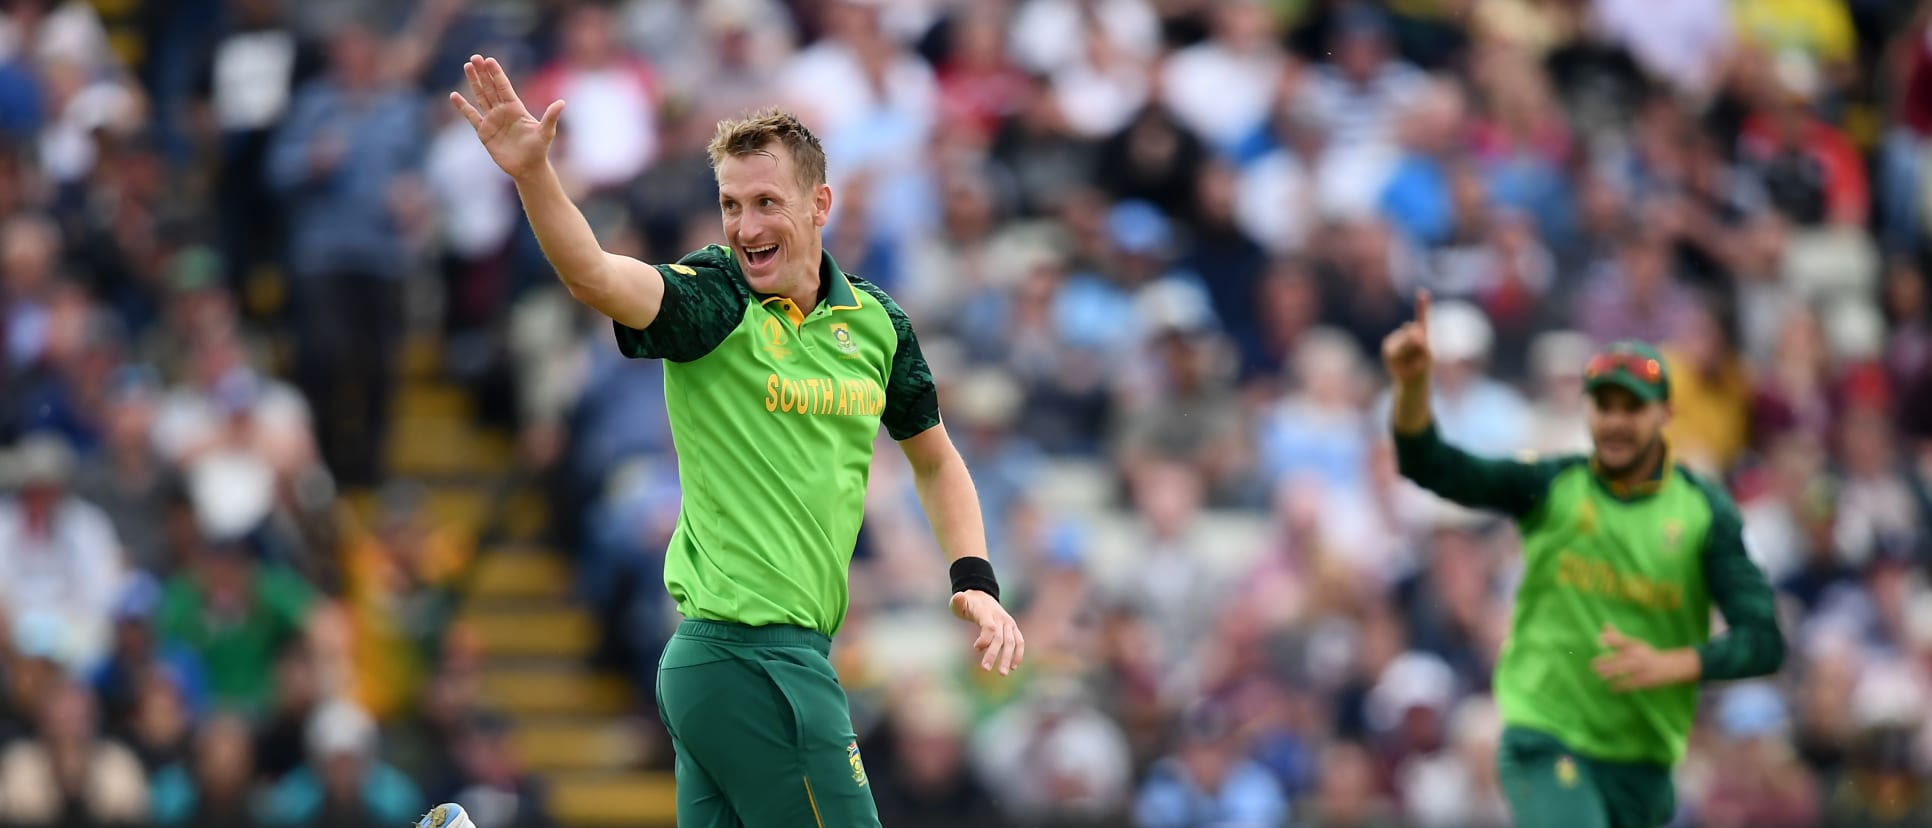 Chris Morris at the 2019 Cricket World Cup